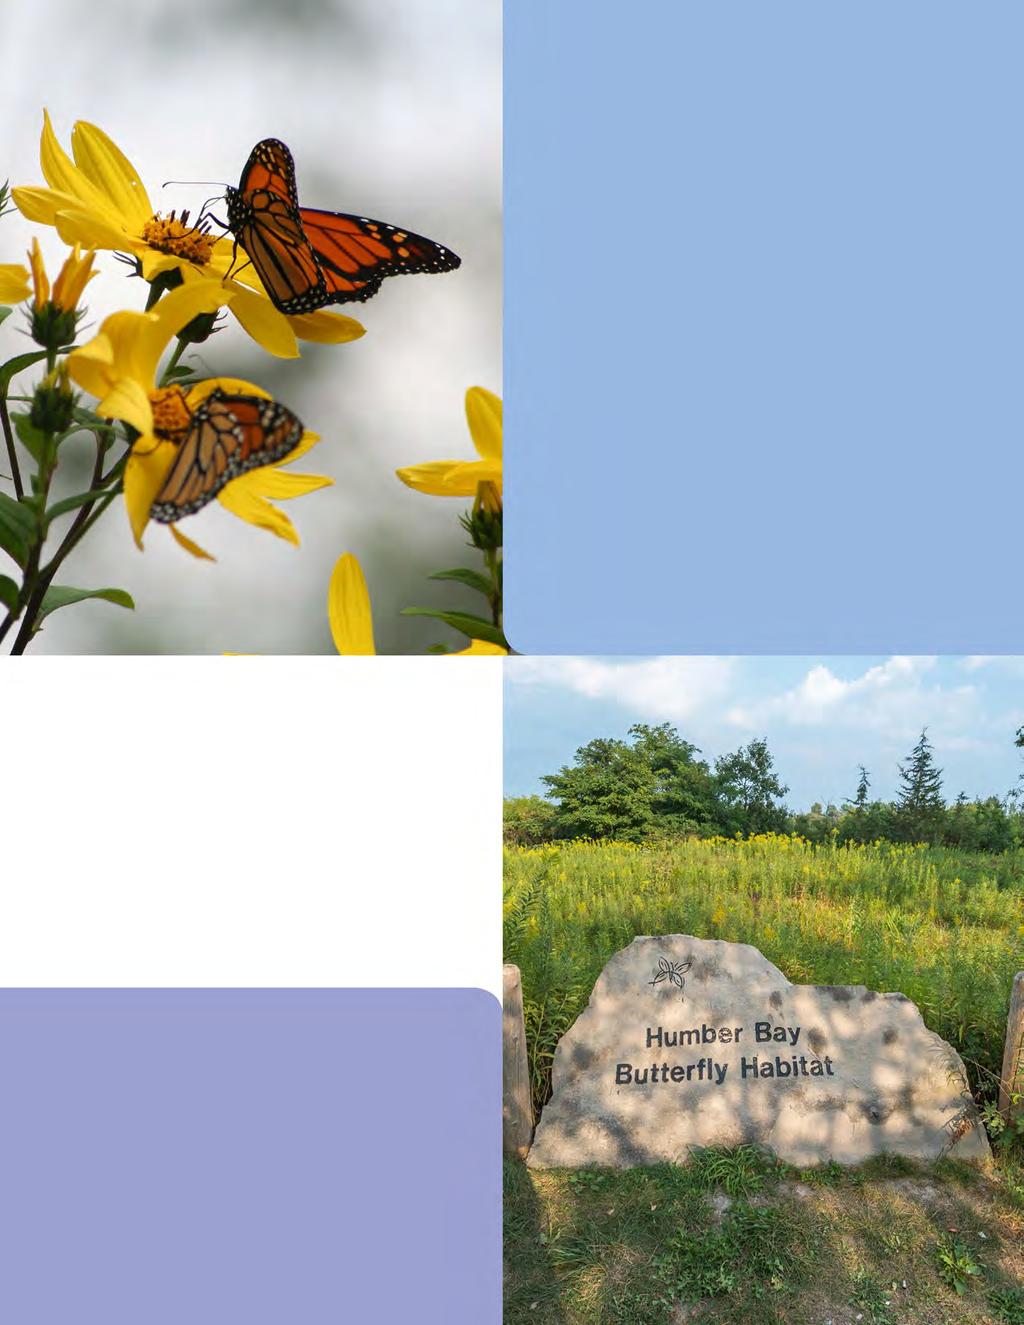 Success story The Humber Bay Butterfly Habitat (HBBH) This City of Toronto led ecological restoration project provides critical habitat for a variety of native butterflies and other pollinators.